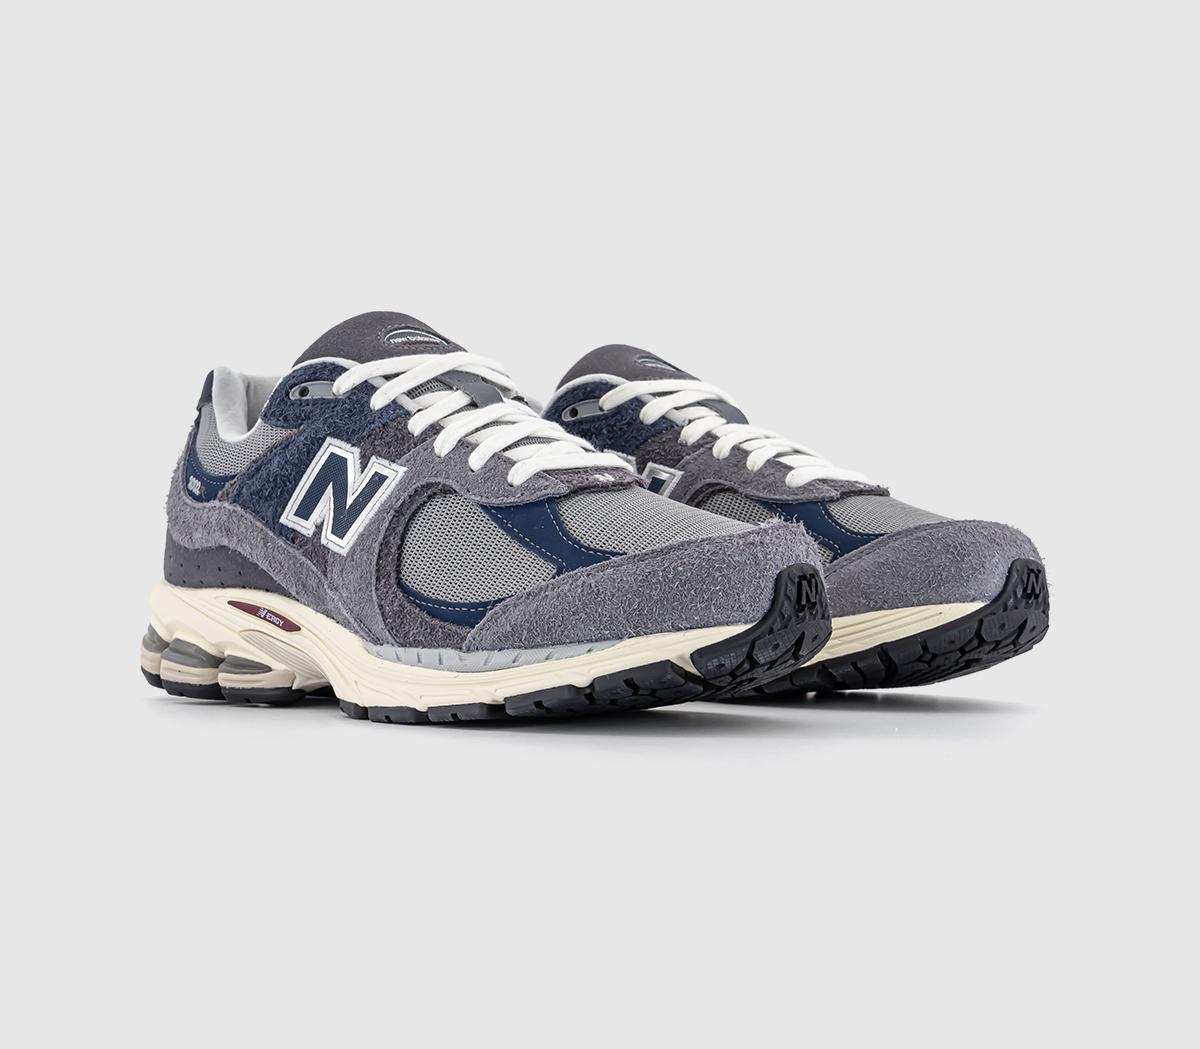 New Balance 2002 Trainers Grey Black Offwhite, 11.5